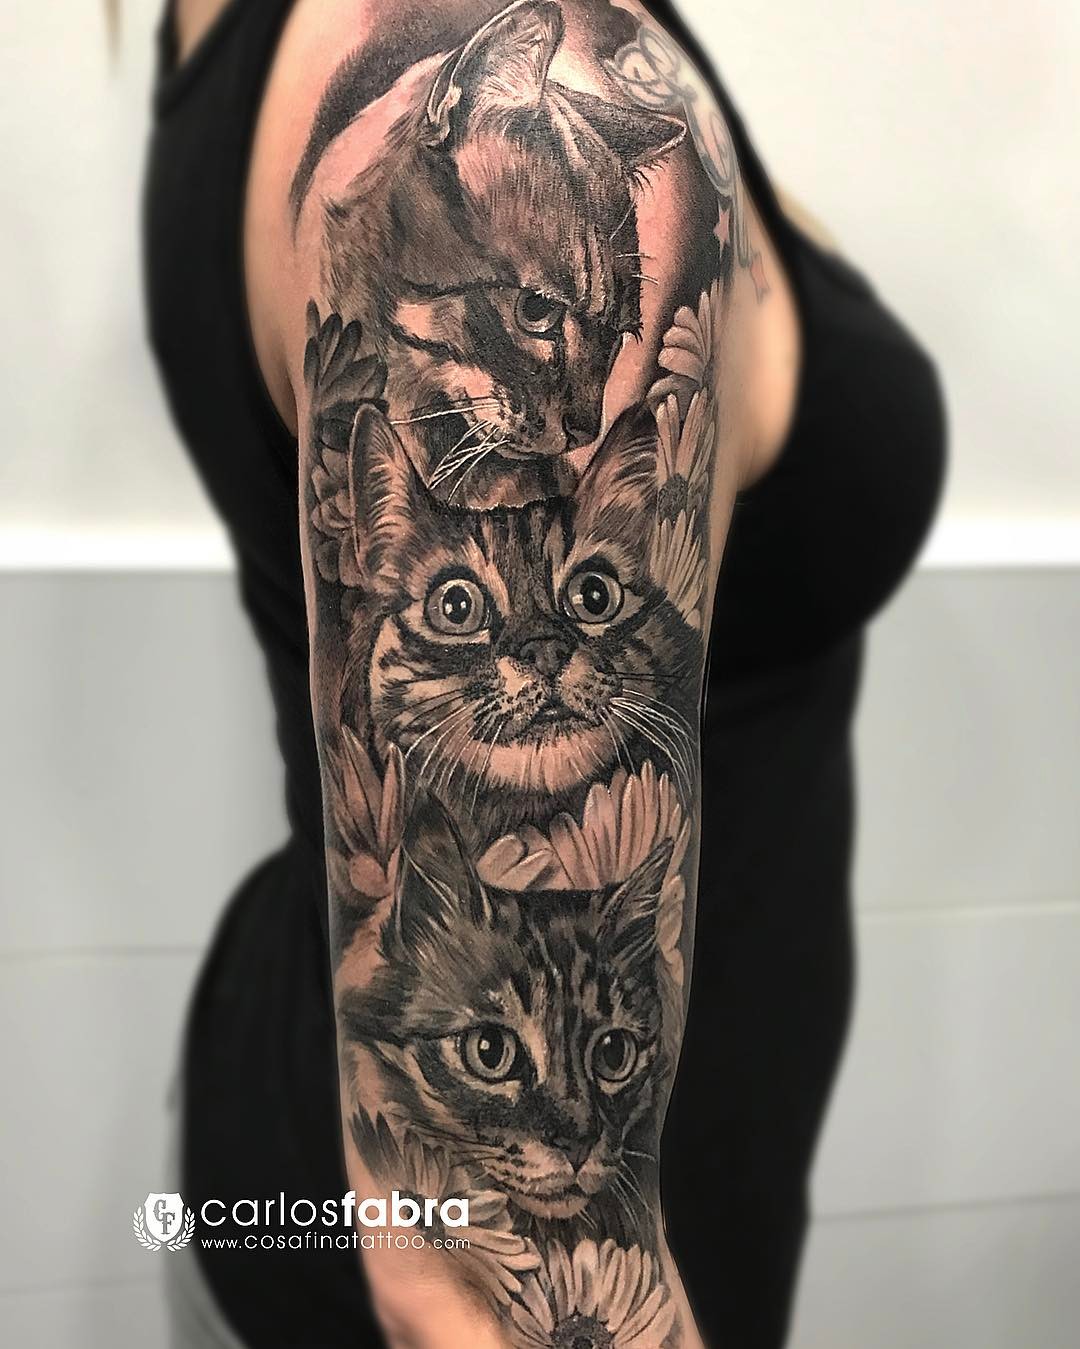 Realistic Cat Tattoo | Time Lapse - YouTube